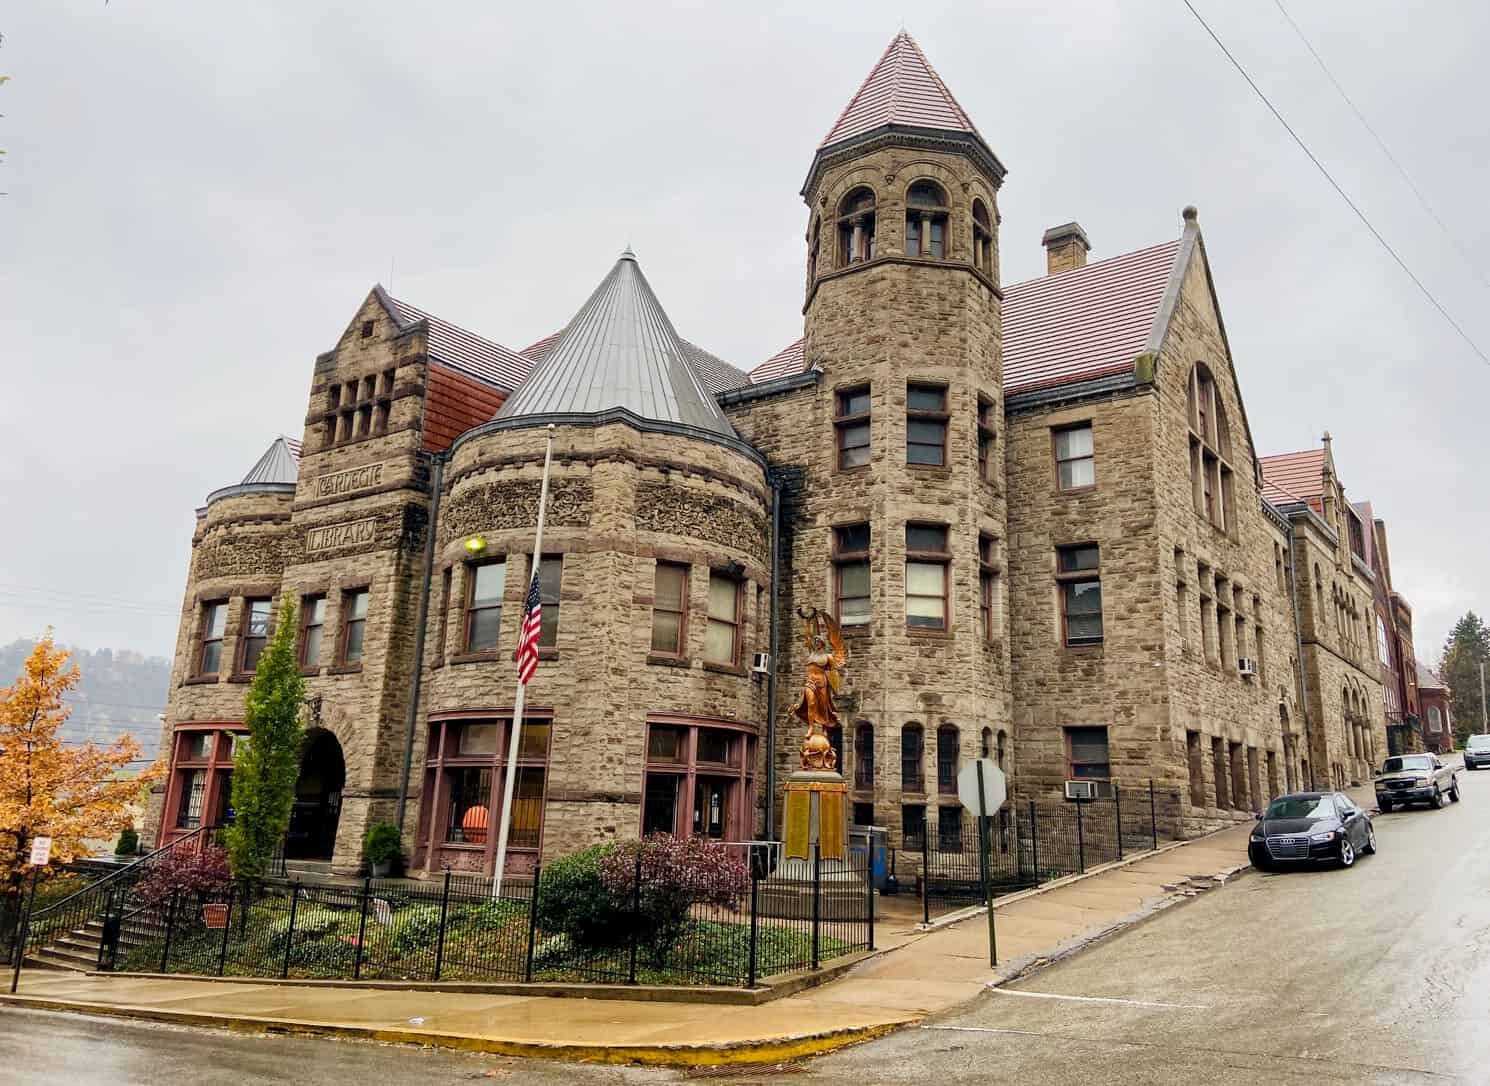  The Braddock library was built in 1889 in the town where the first steel mill set up by Carnegie still operates. 